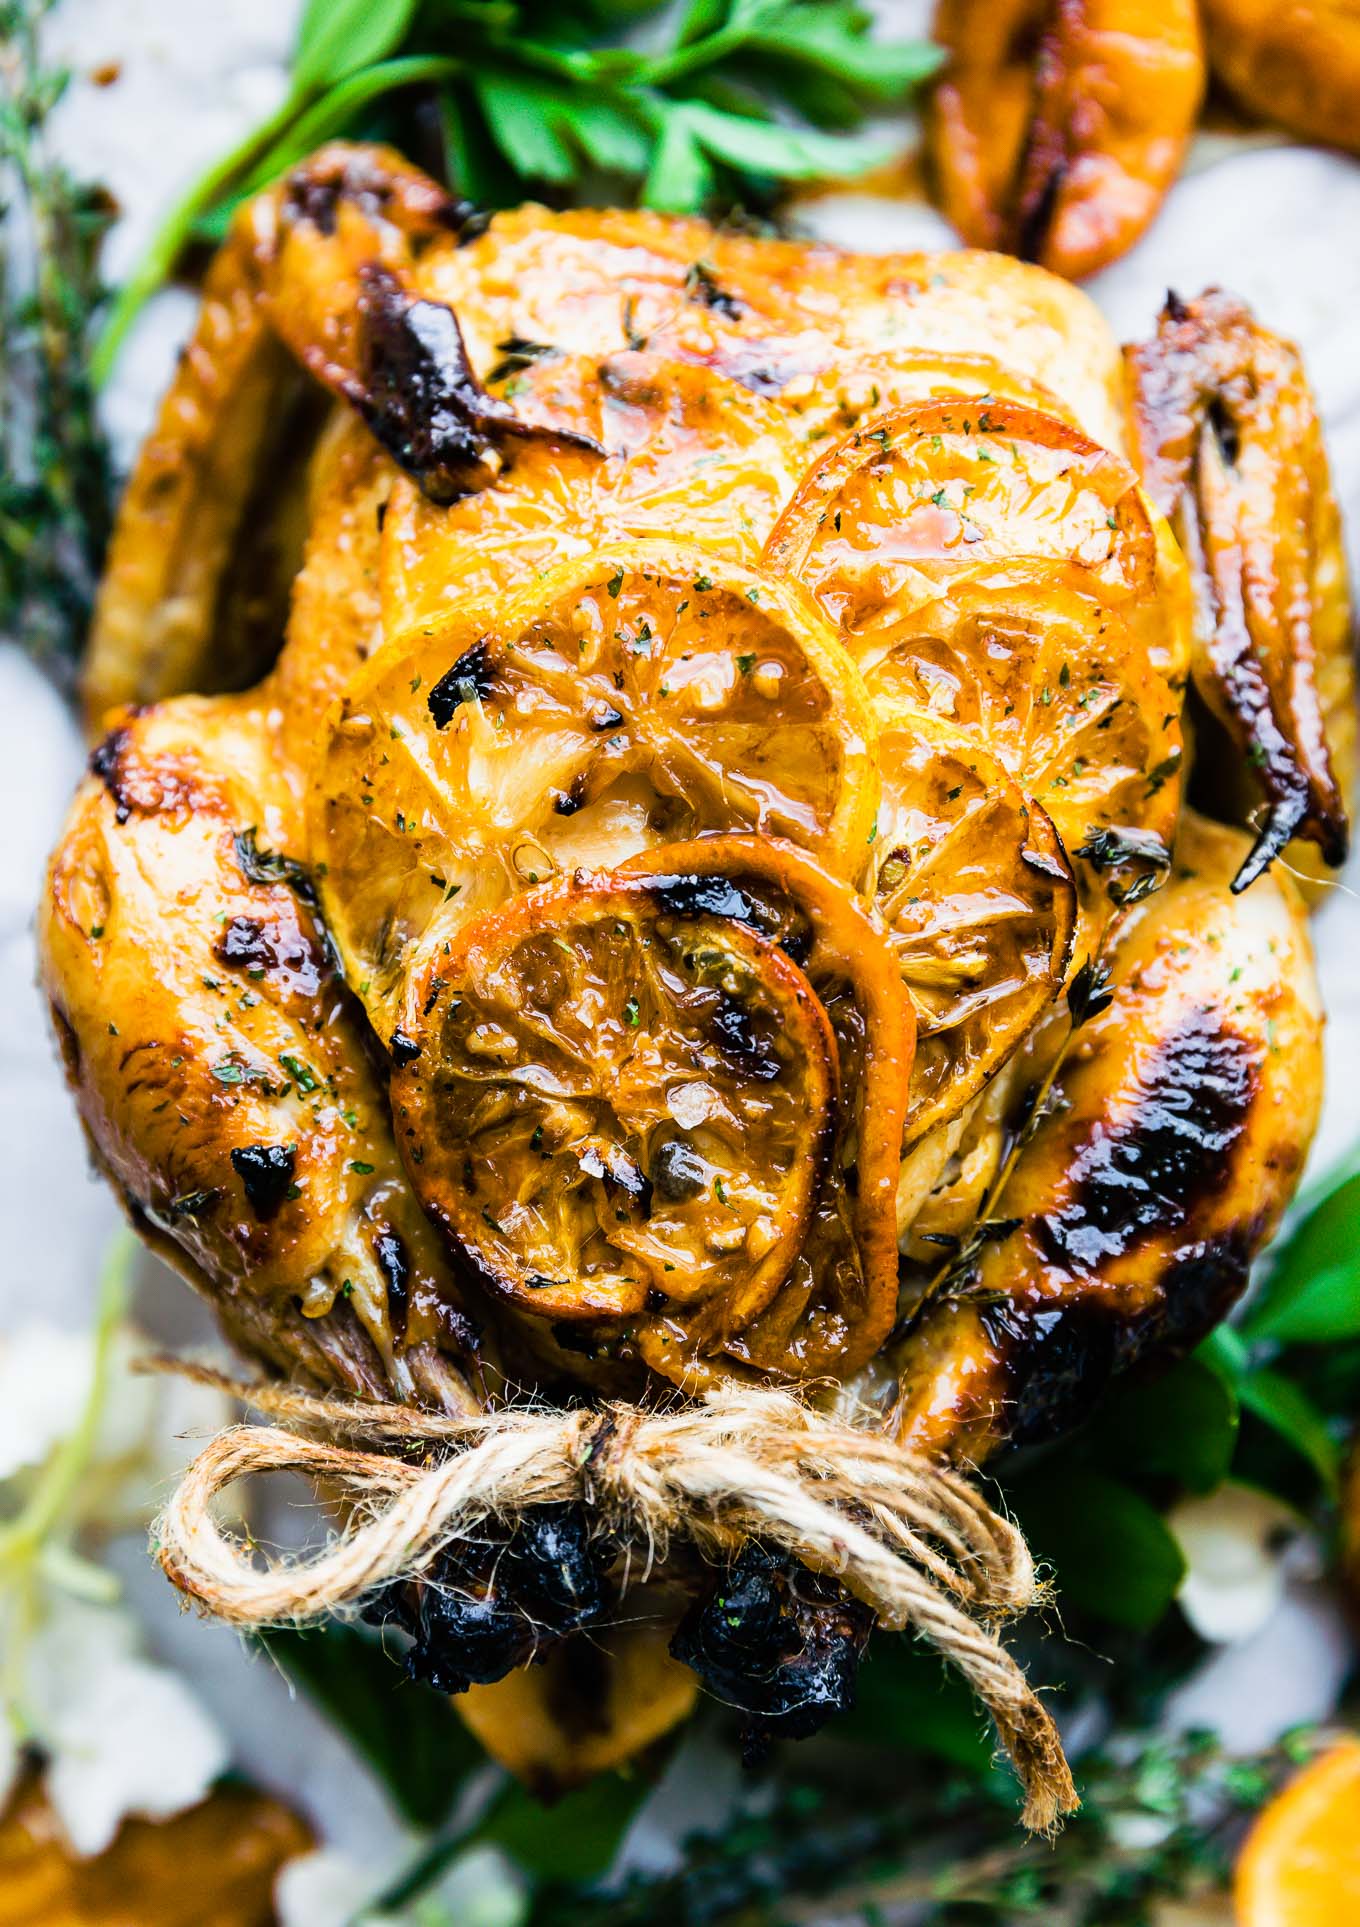 Roasted whole chicken with orange slices caramelized onto skin, chicken legs tied together with twine.